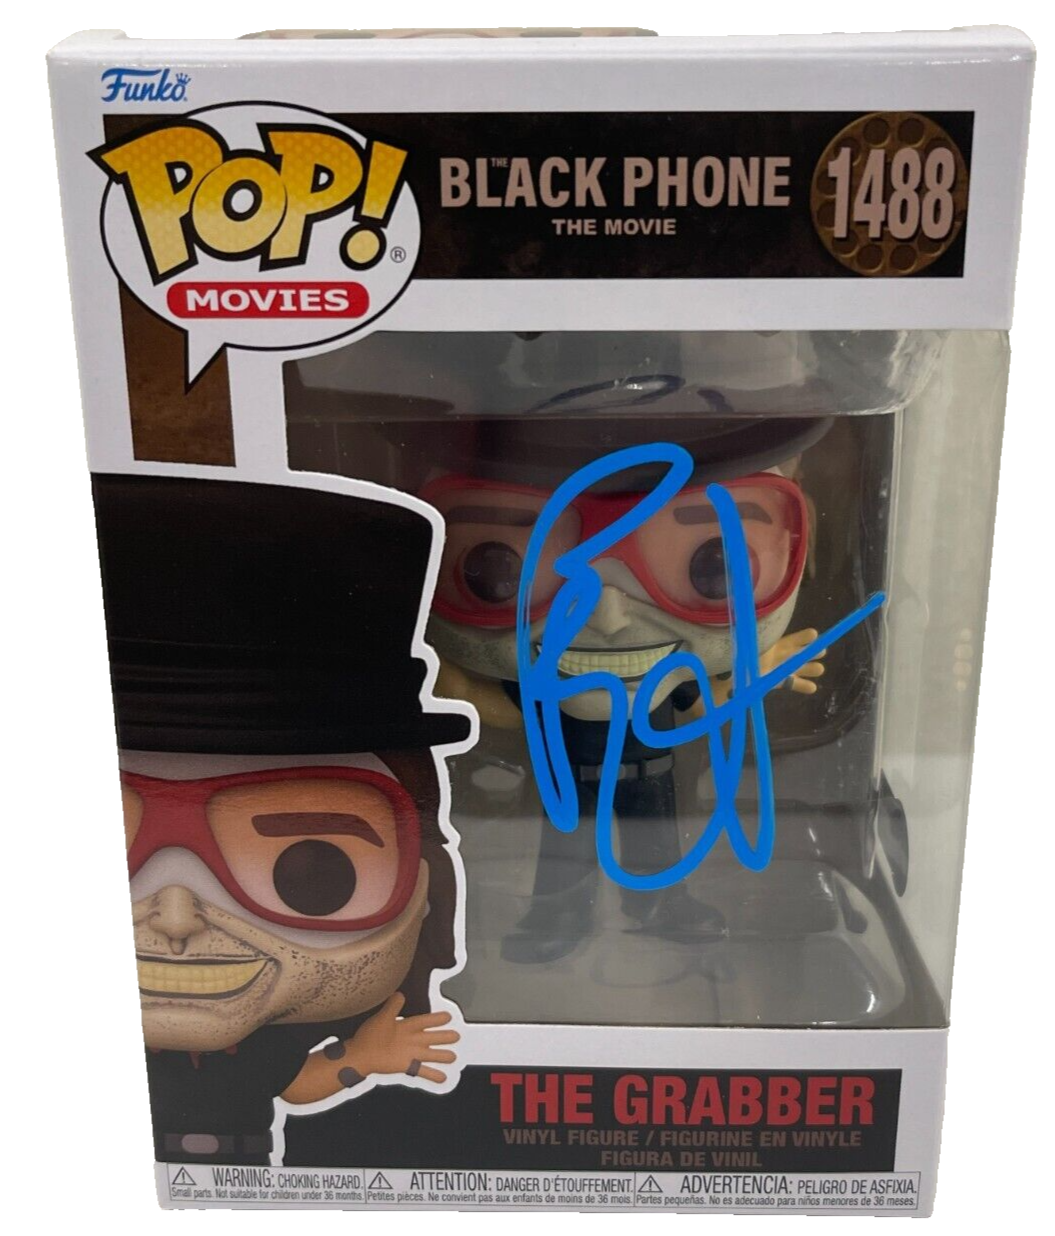 Ethan Hawke Authentic Autographed The Grabber Black Phone the Movie 1488 Funko Pop Figure